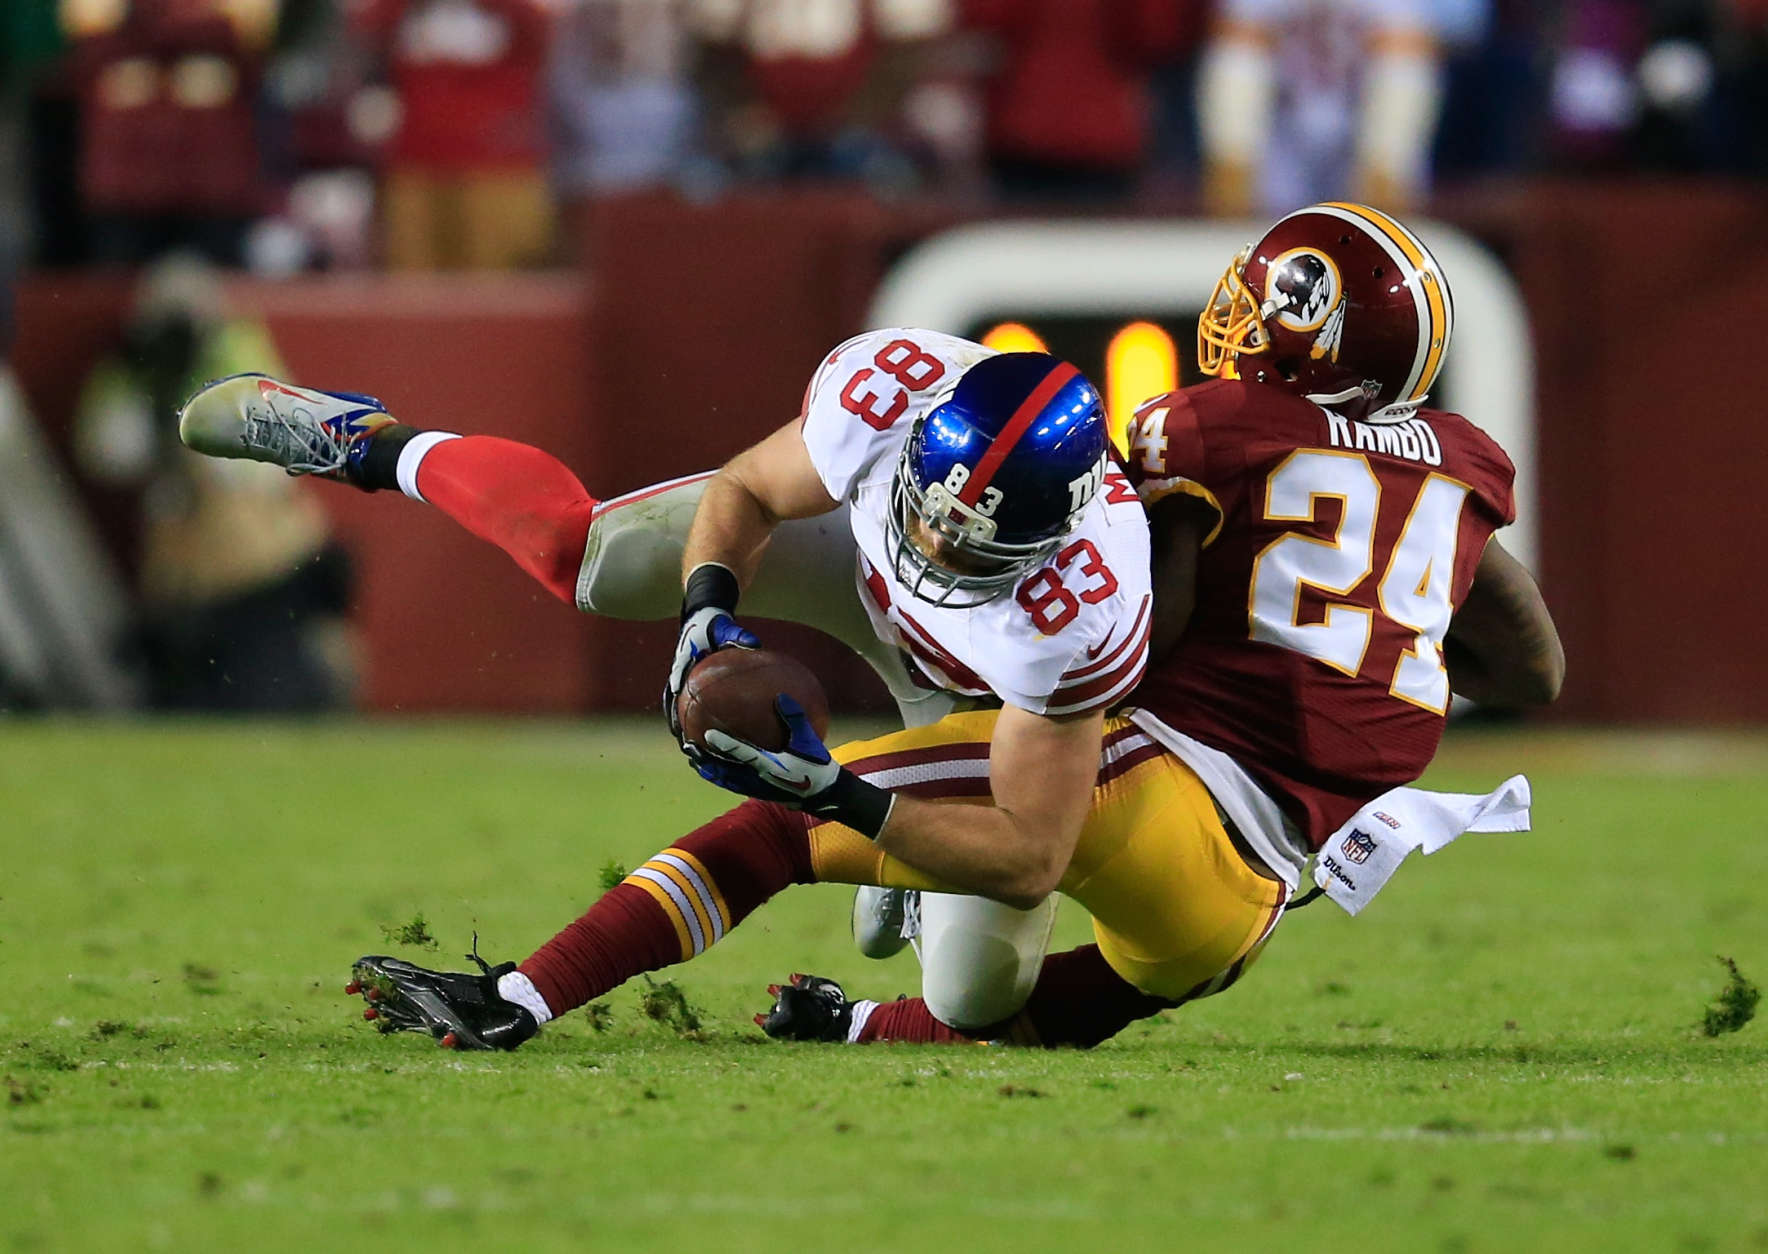 LANDOVER, MD - DECEMBER 01: Tight end Brandon Myers #83 of the New York Giants is tackled by strong safety Bacarri Rambo #24 of the Washington Redskins after catching a fourth quarter pass during the Giants 24-17 win at FedExField on December 1, 2013 in Landover, Maryland.  (Photo by Rob Carr/Getty Images)